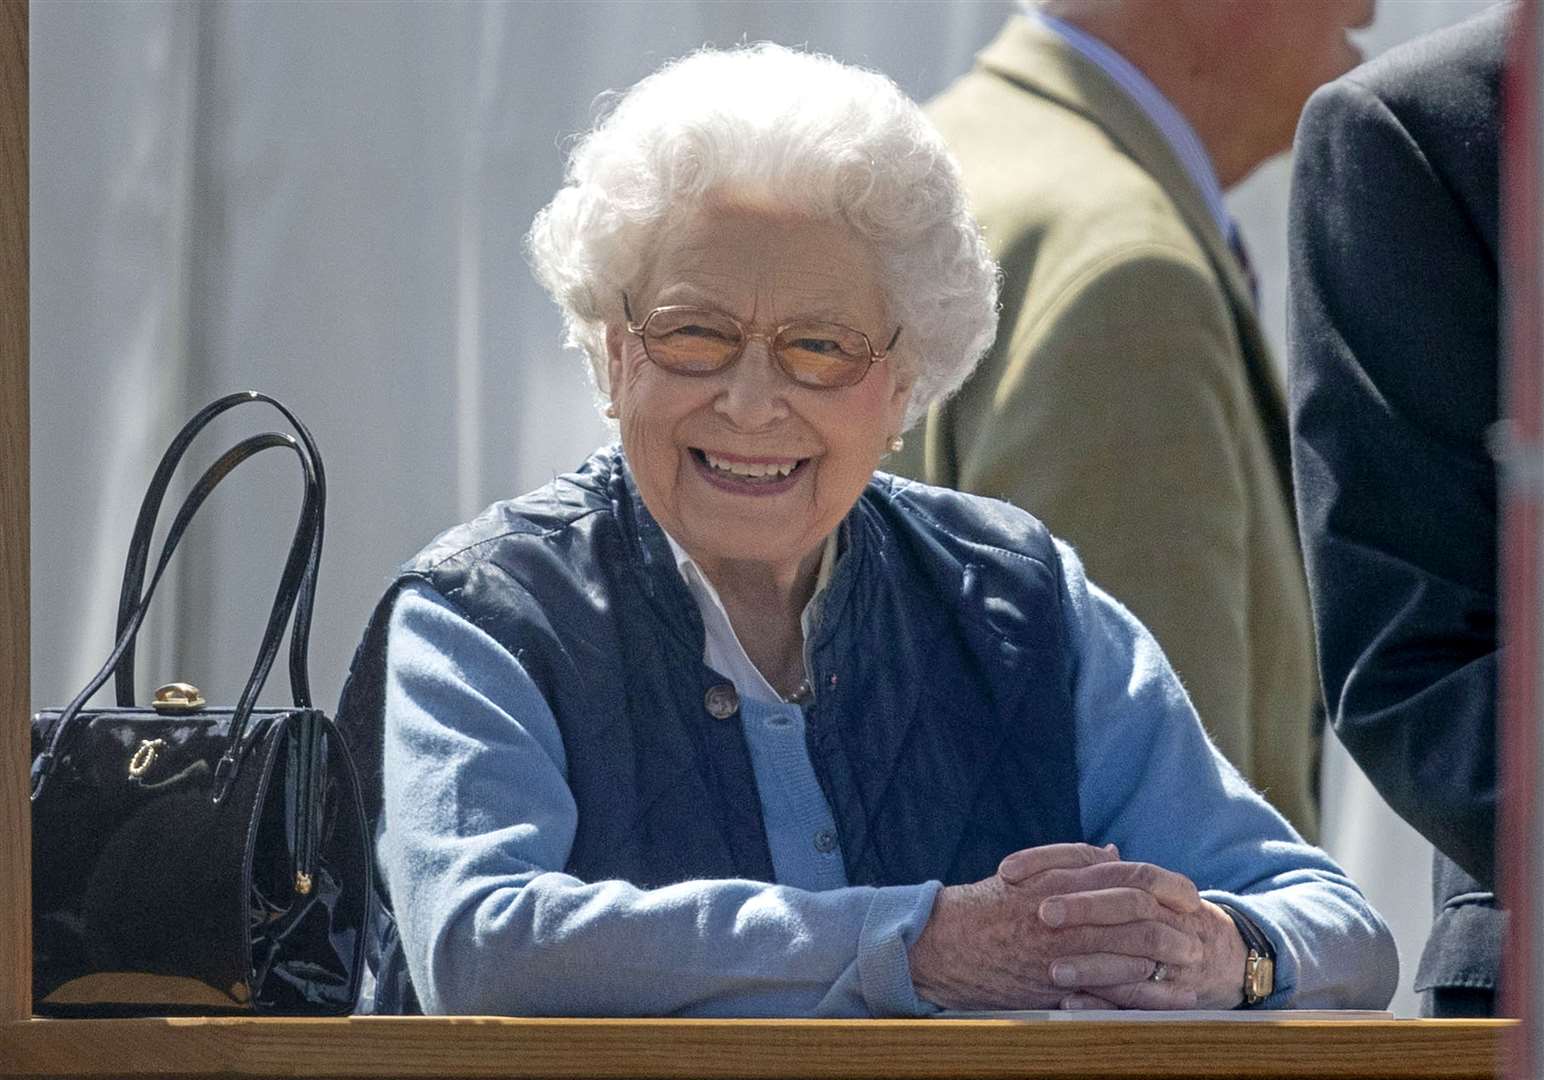 The Queen at the Royal Windsor Horse Show, which has also been cancelled this year (Steve Parsons/PA)